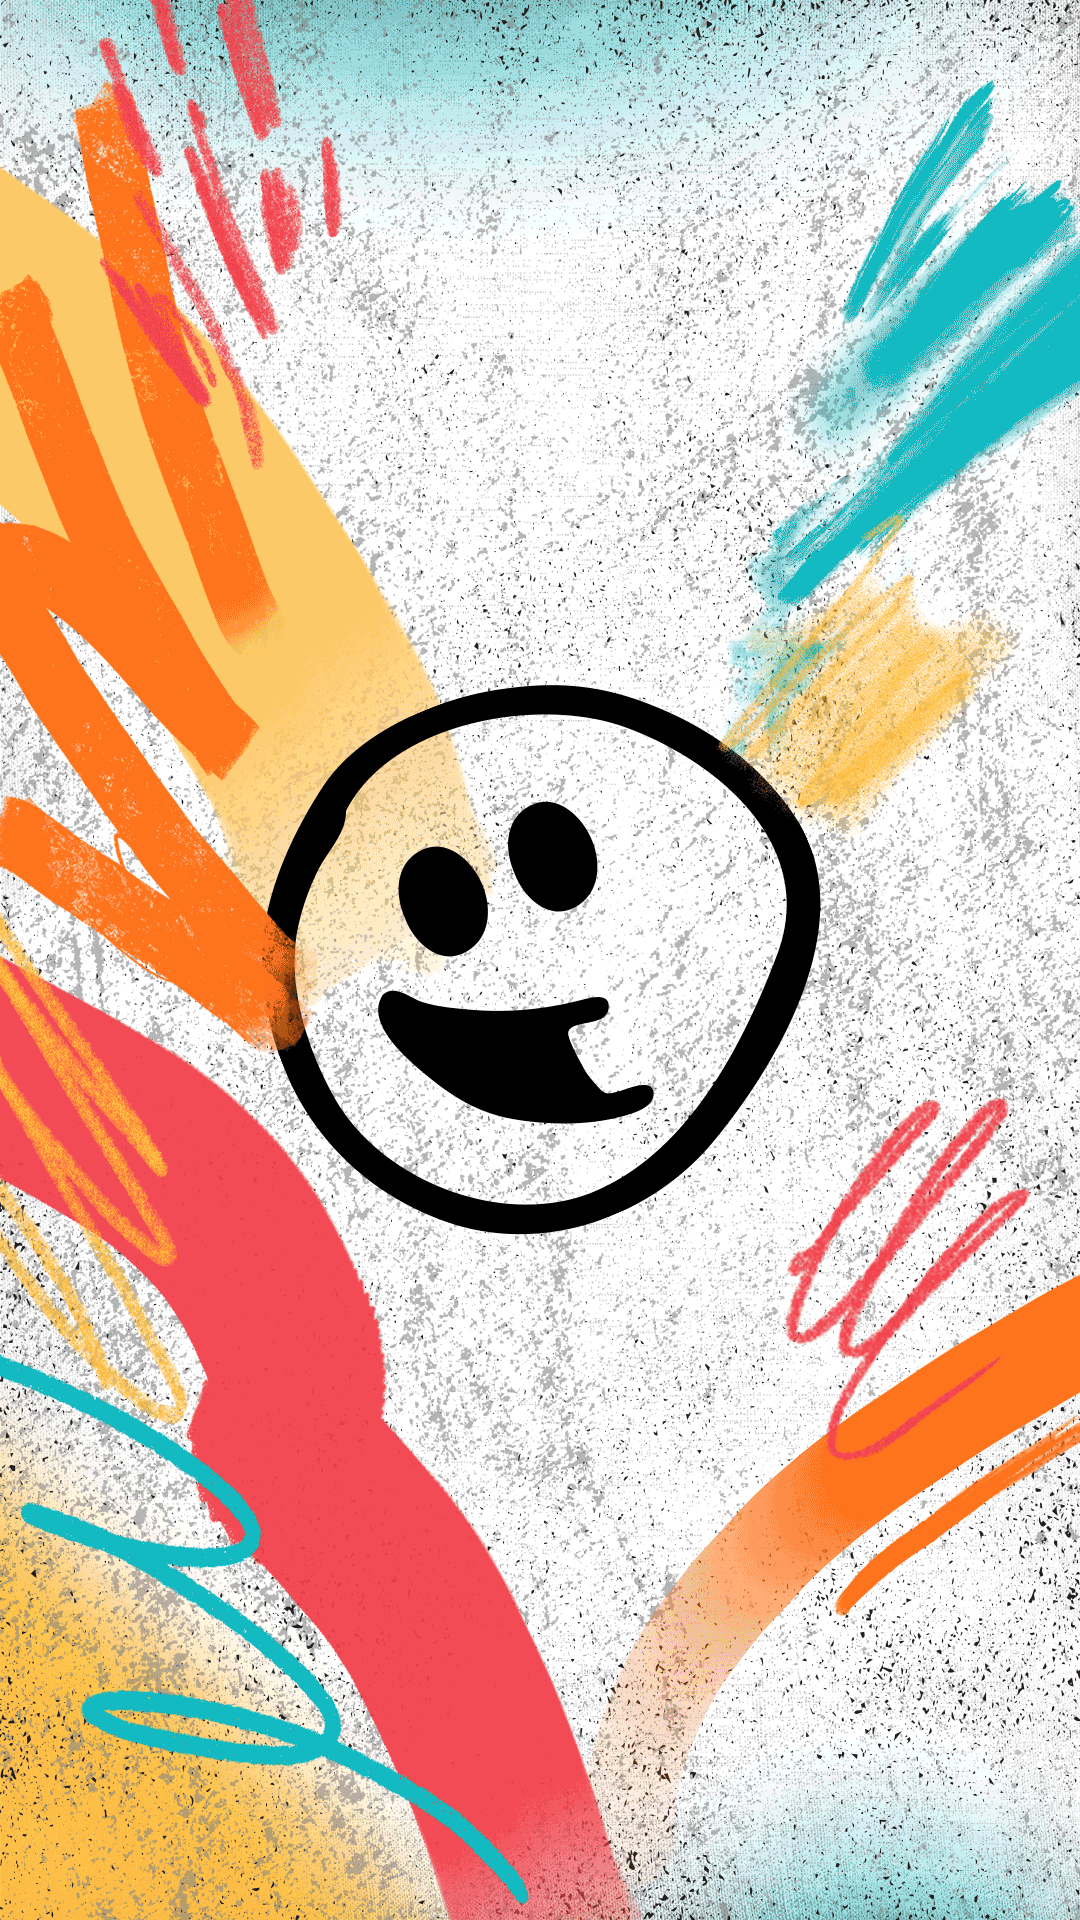 Splash of Color abstract artsy bright colors brushstrokes collage composition cute expressive face impressionistic paint brush sketchy smiley splashes textures